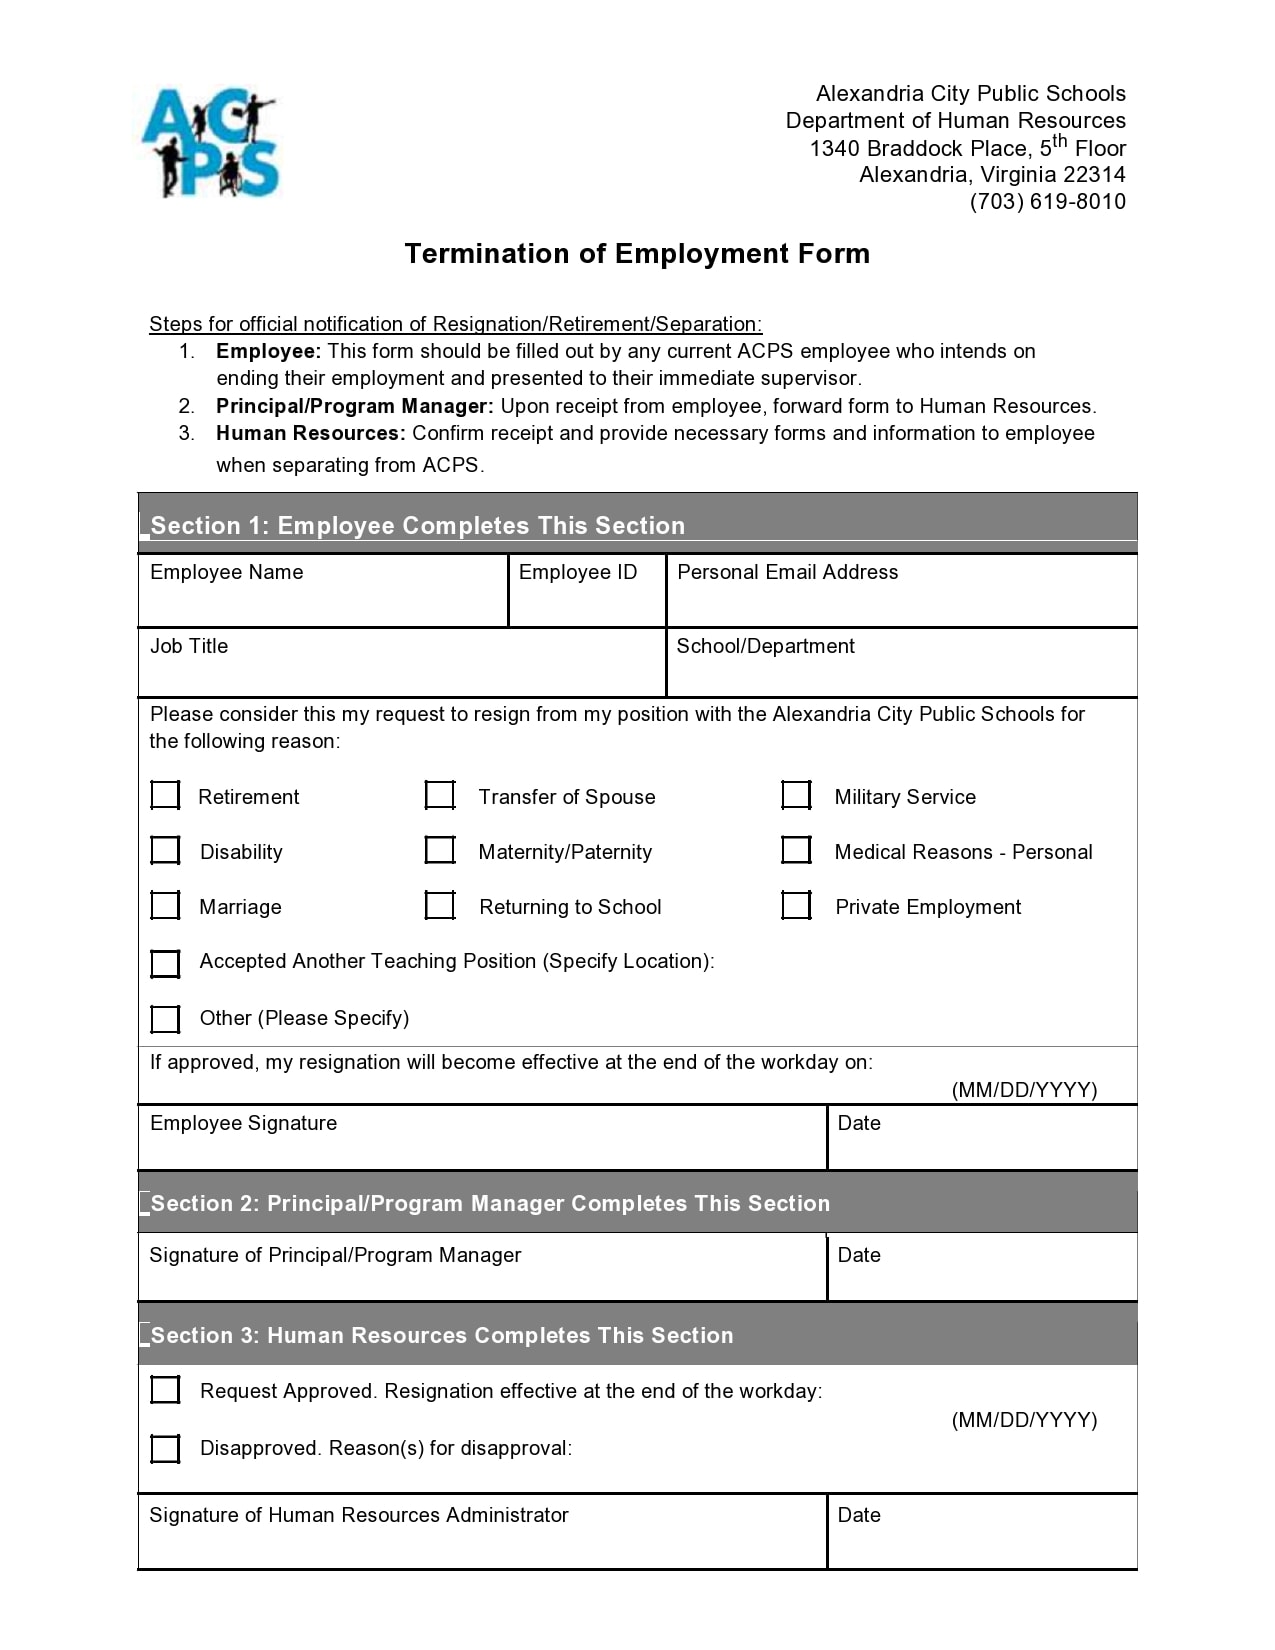 printable-employee-termination-form-how-to-create-an-employee-termination-form-download-this